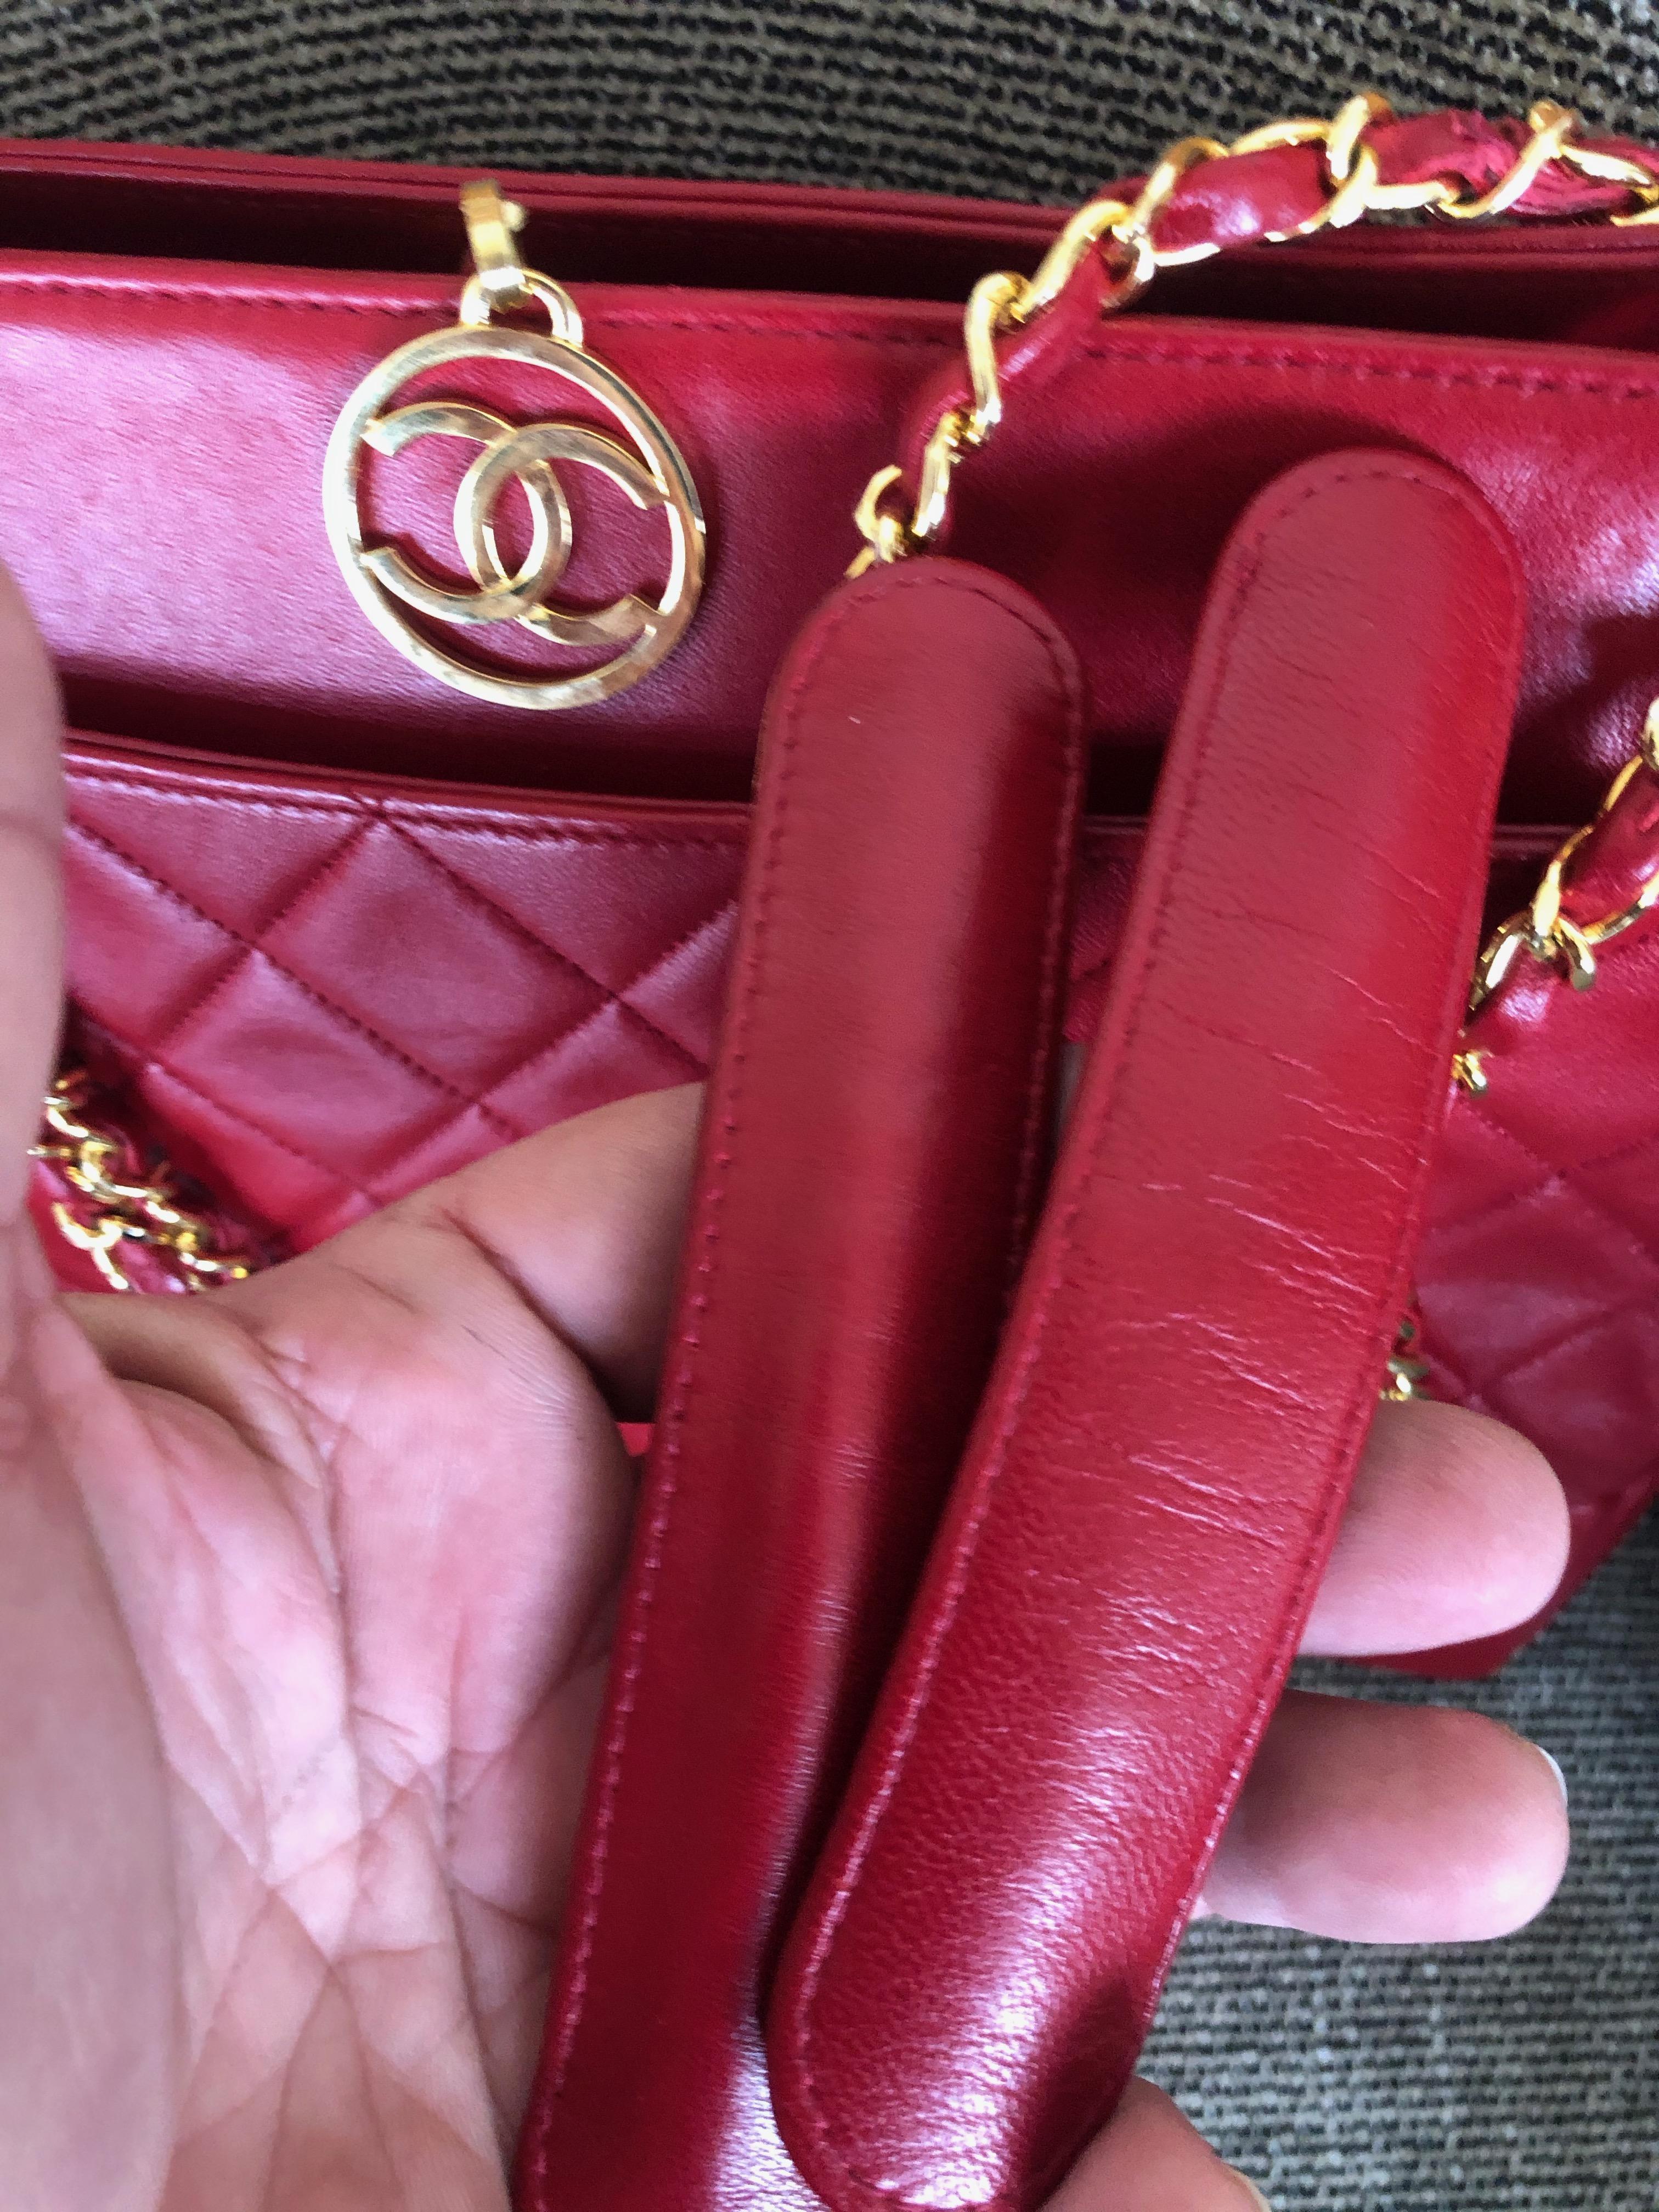 Chanel Tomato Red Vintage Lambskin Leather Quilted Tote Bag with Gold Hardware In Excellent Condition For Sale In Cloverdale, CA